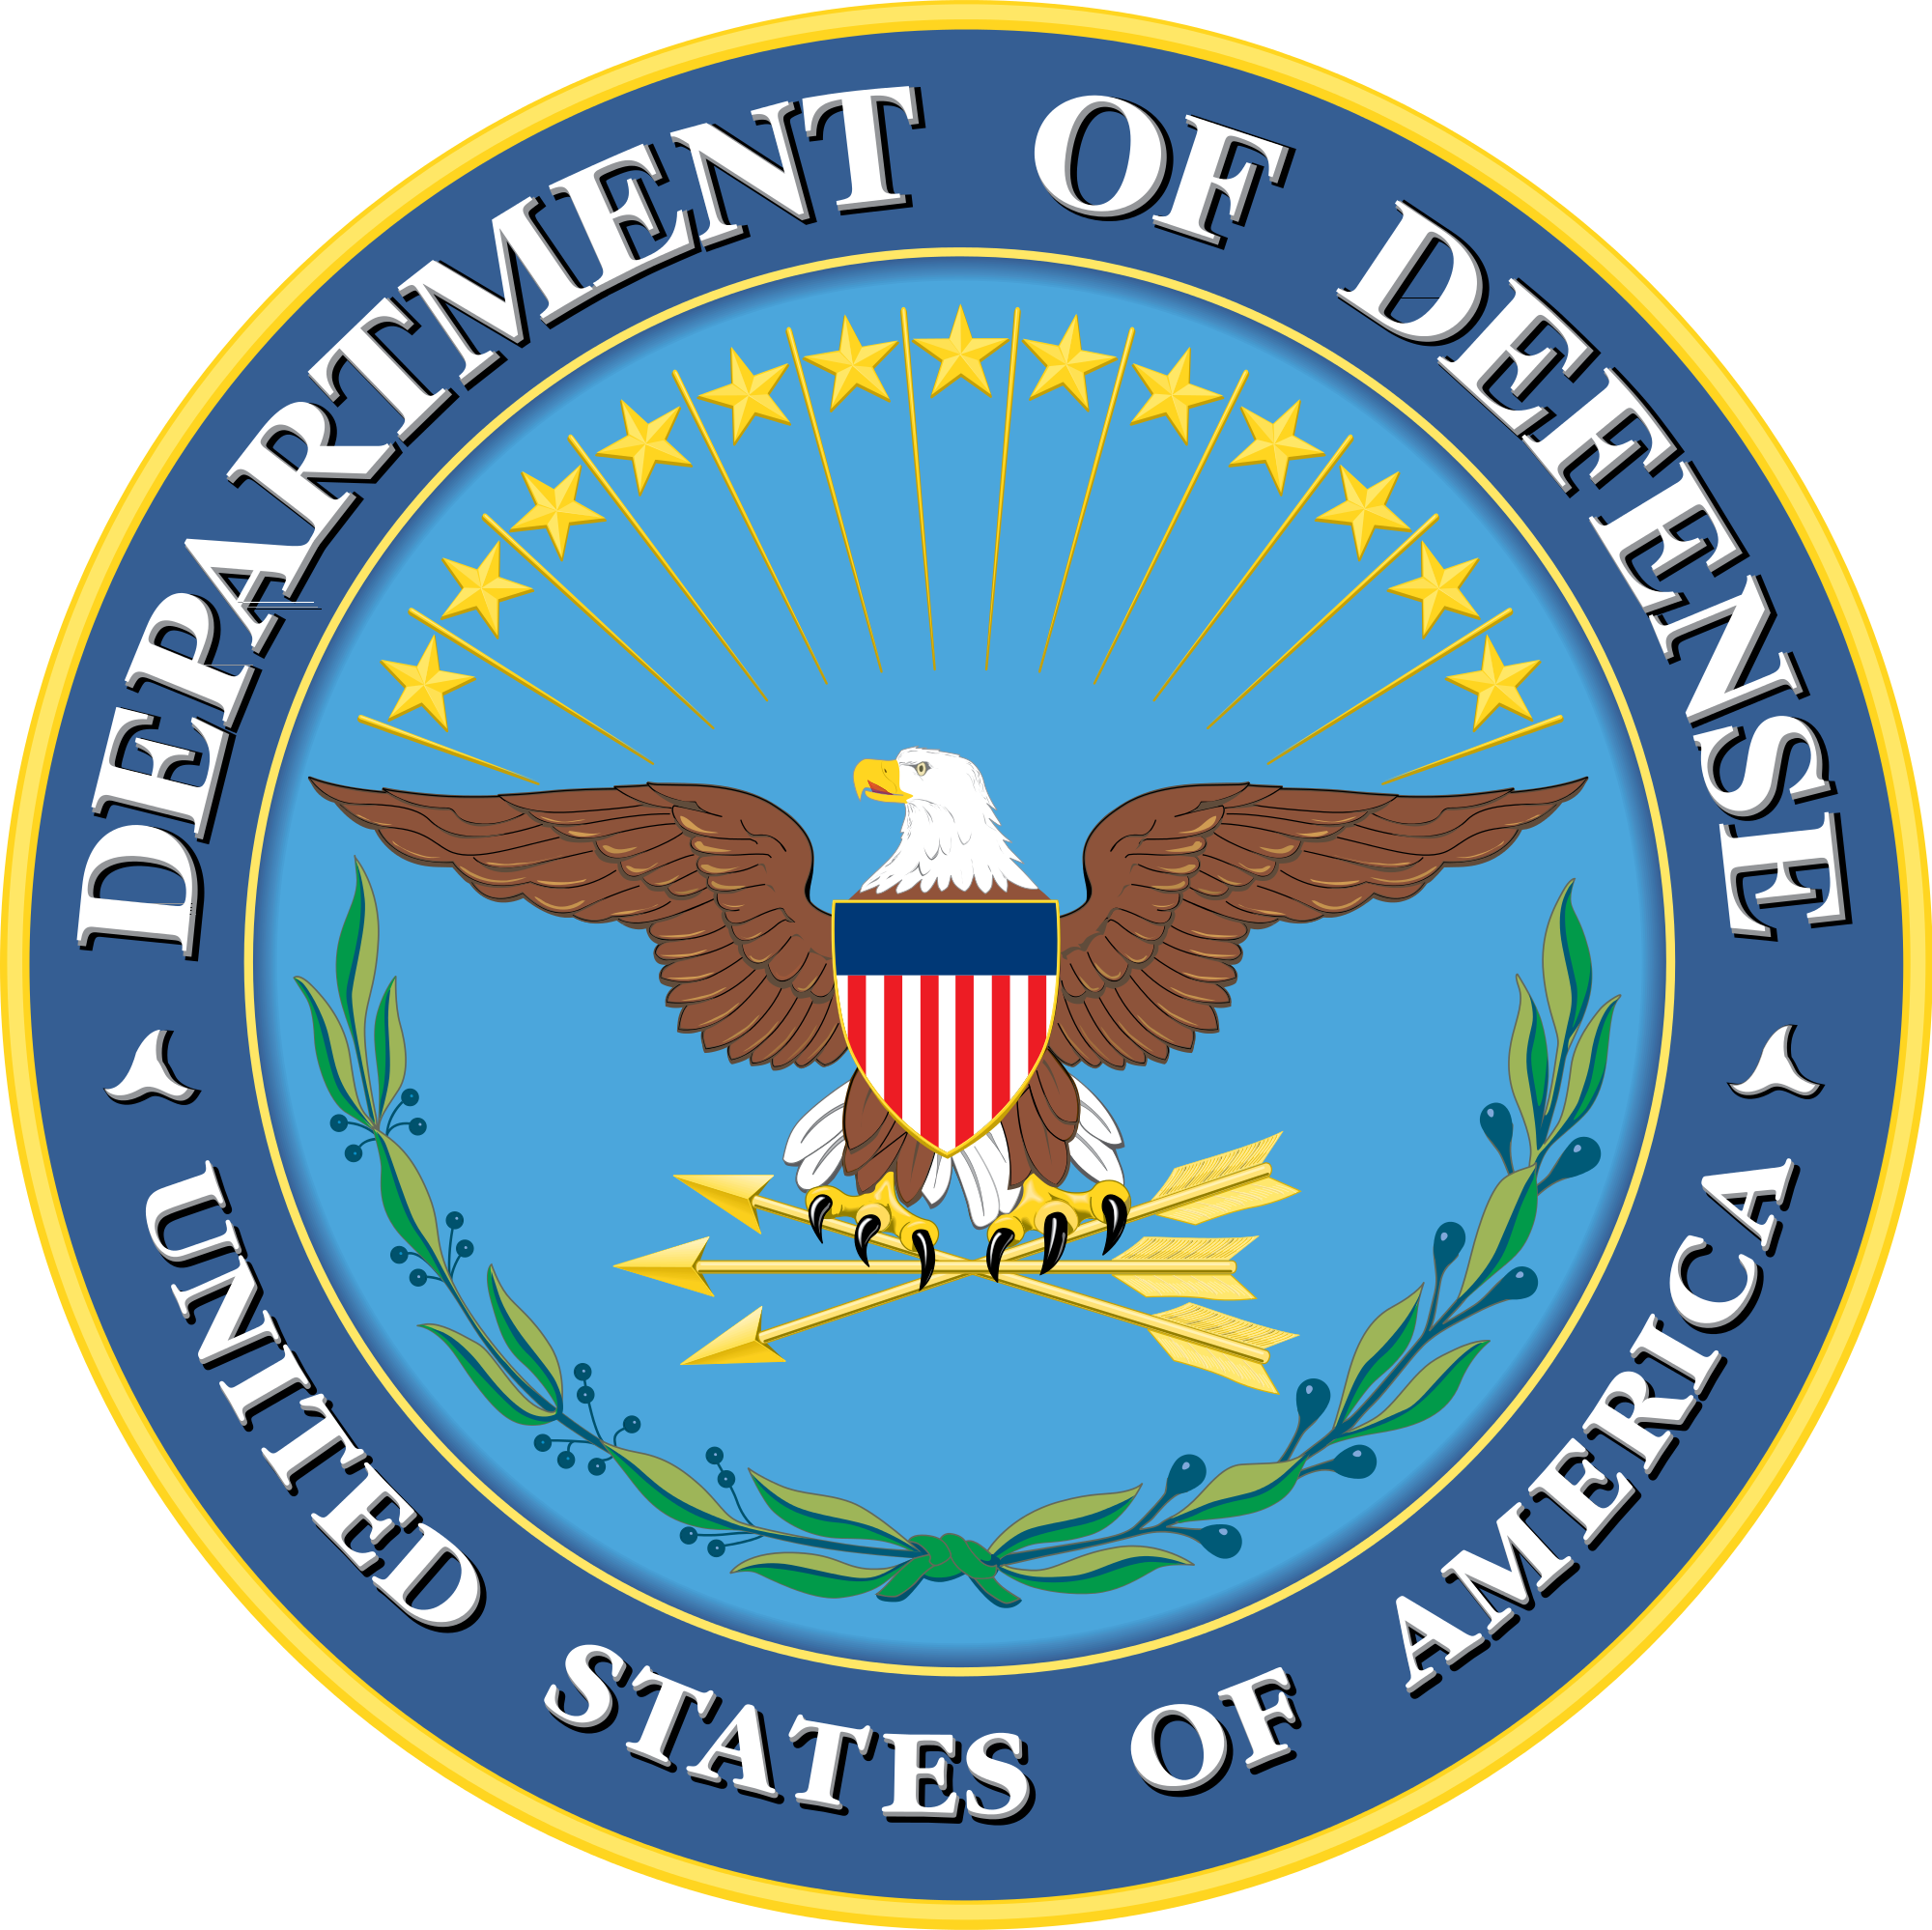 Dod Srg Complaint - United States Department Of Defense (2400x2396)